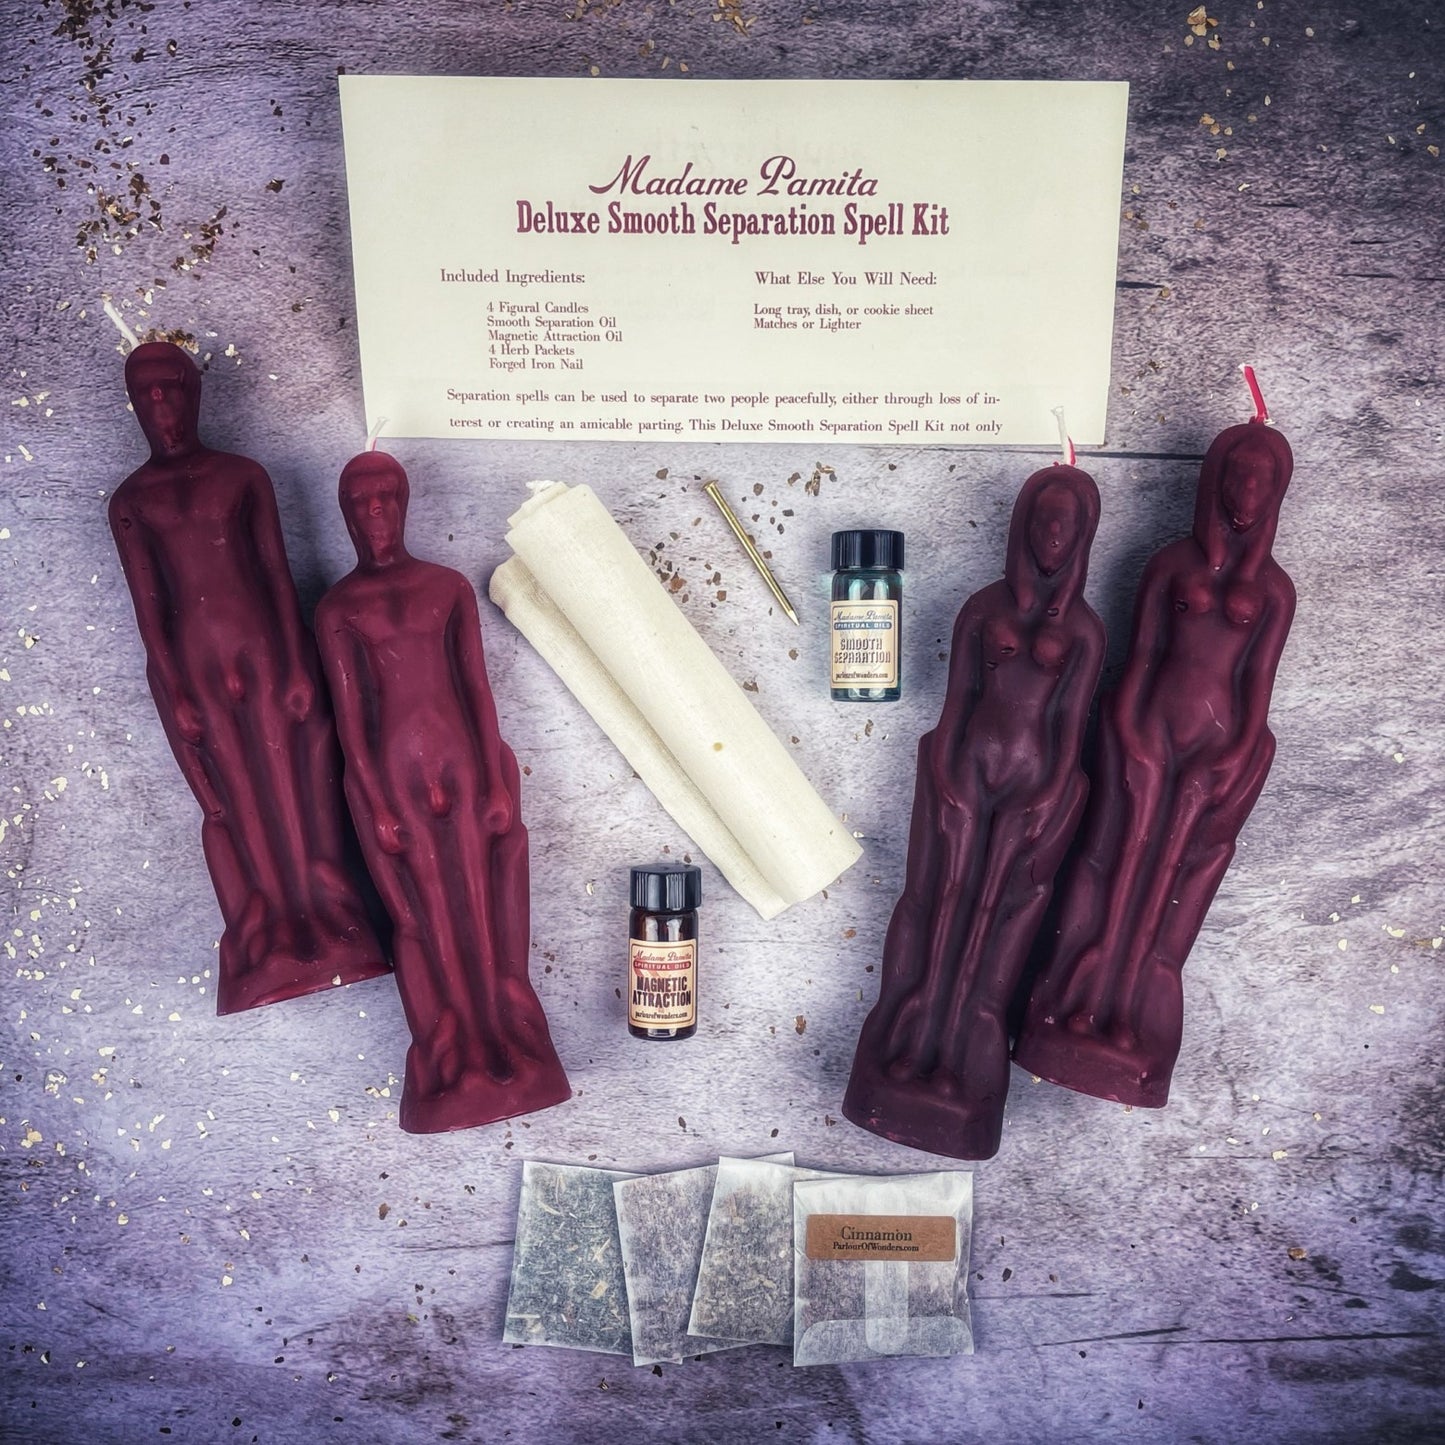 Deluxe Smooth Separation Candle Spell Kit - Female/Male